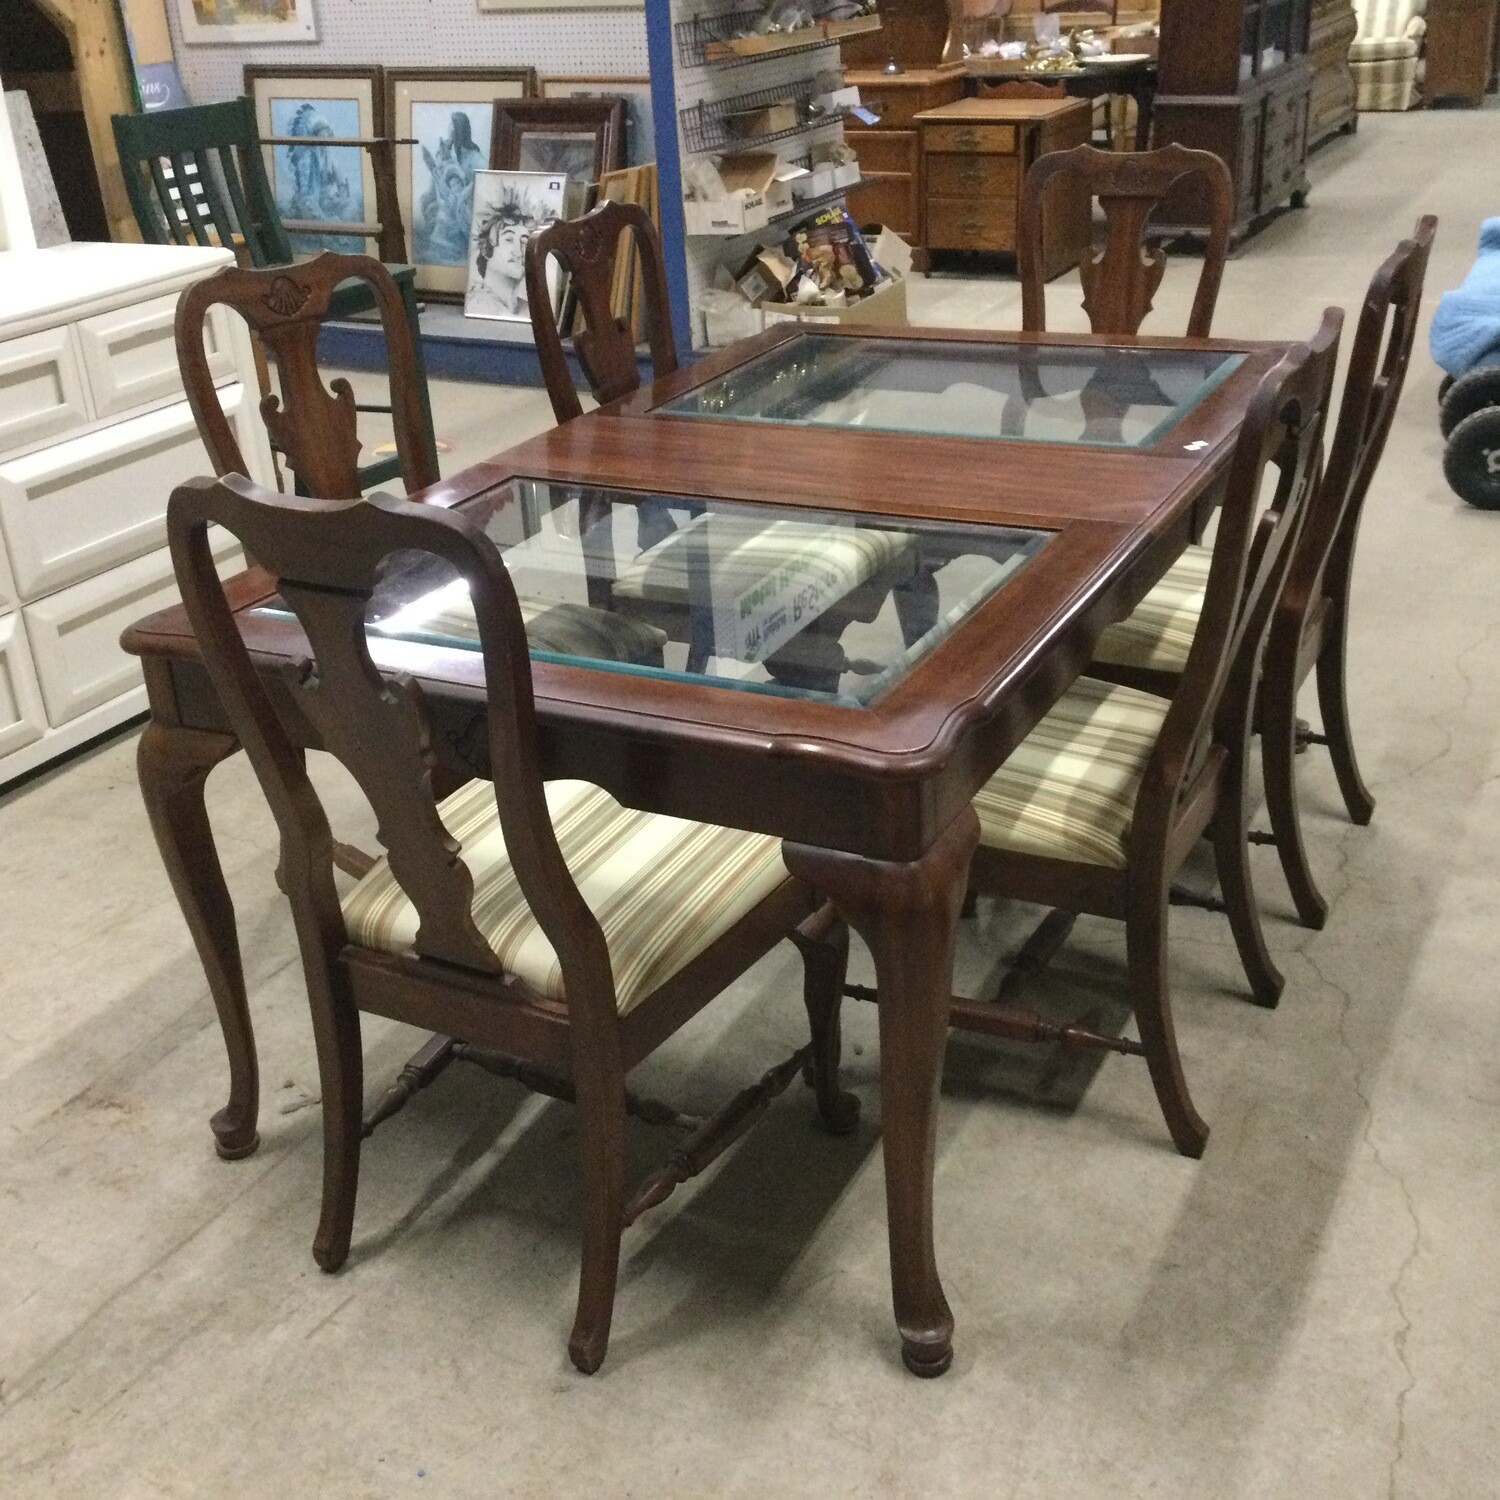 Glass-Insert Top Dining Room Table & 6 Chairs Set